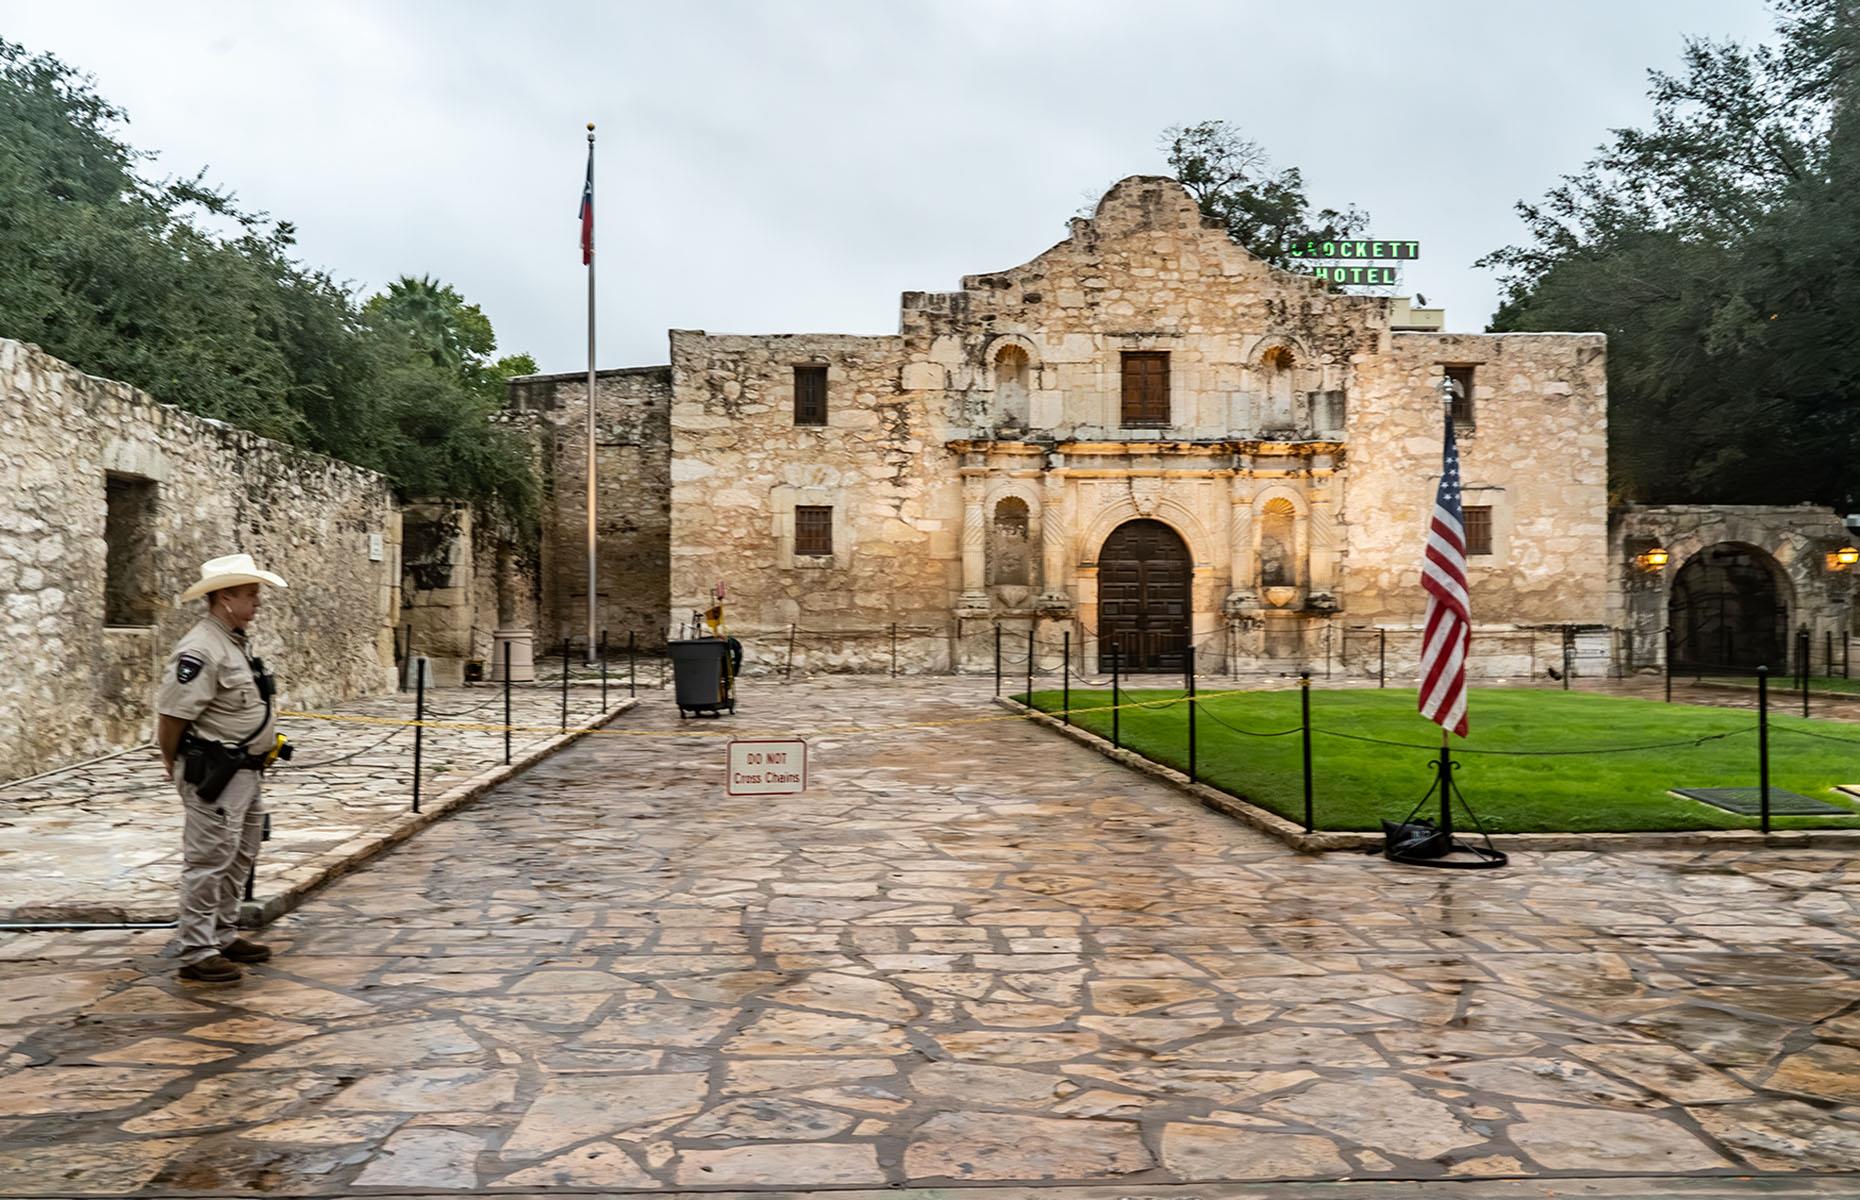 <p>Arguably San Antonio’s most famous landmark, The Alamo is a honey-stoned historic Spanish mission and fortress that holds a special place in the Texan psyche.</p>  <p>The battle here in 1836, although lost, became a rallying point for the fight for Texan independence. The knowledgeable guides here explain the story as well as characters like Davy Crockett, who played their part in creating the legend.</p>  <p>Make sure you check out the Phil Collins Collection. The former Genesis drummer accumulated the biggest collection of Alamo memorabilia in the world and recently gifted it to the State of Texas.</p>